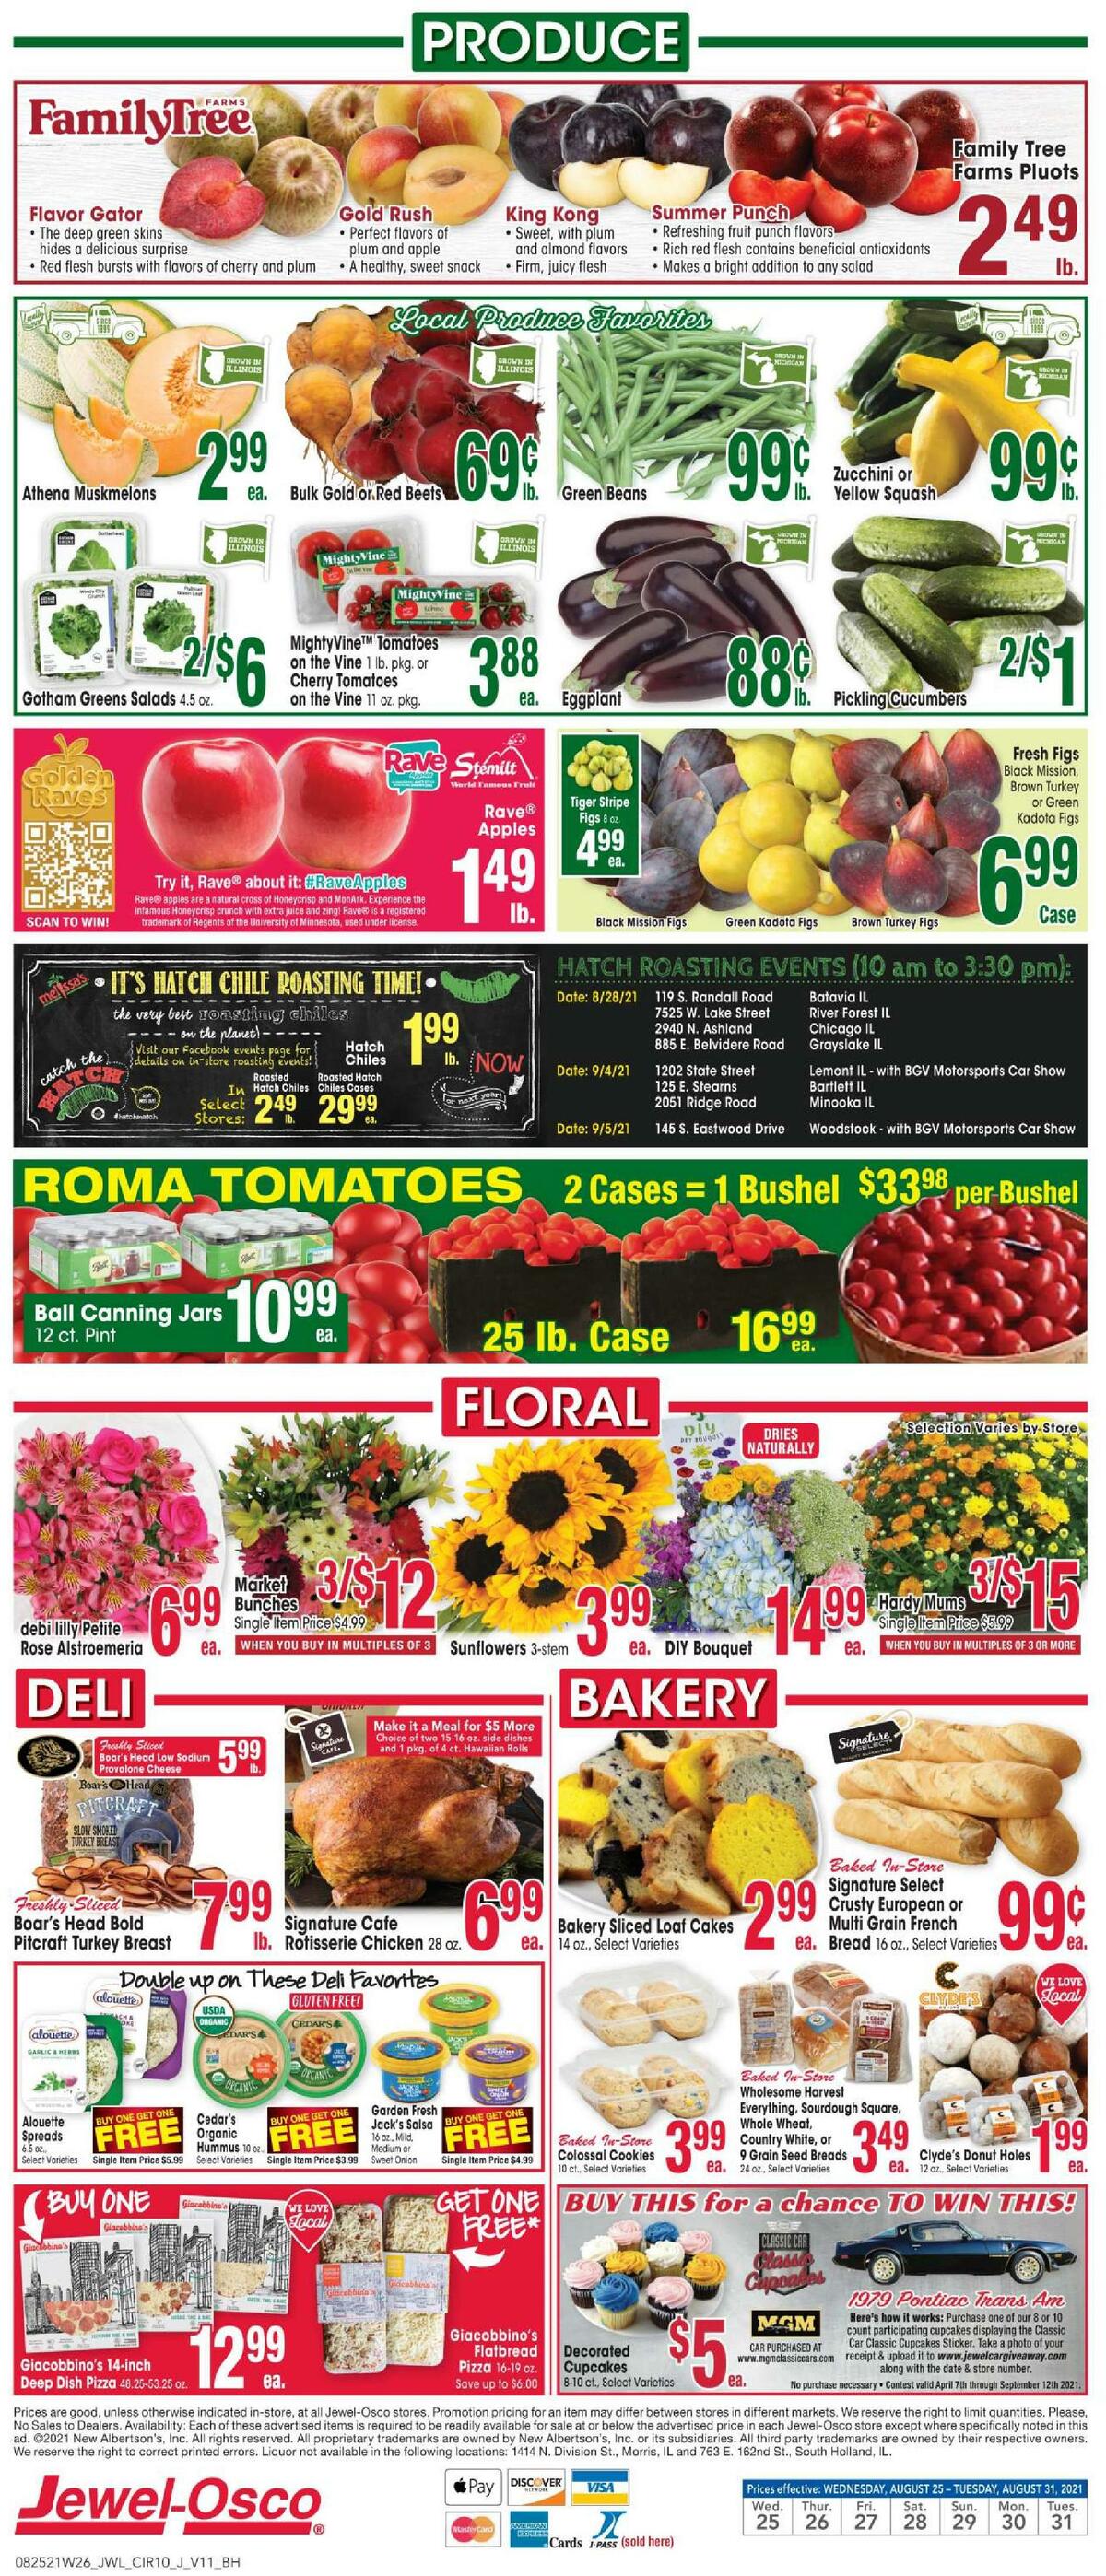 Jewel Osco Weekly Ad from August 25